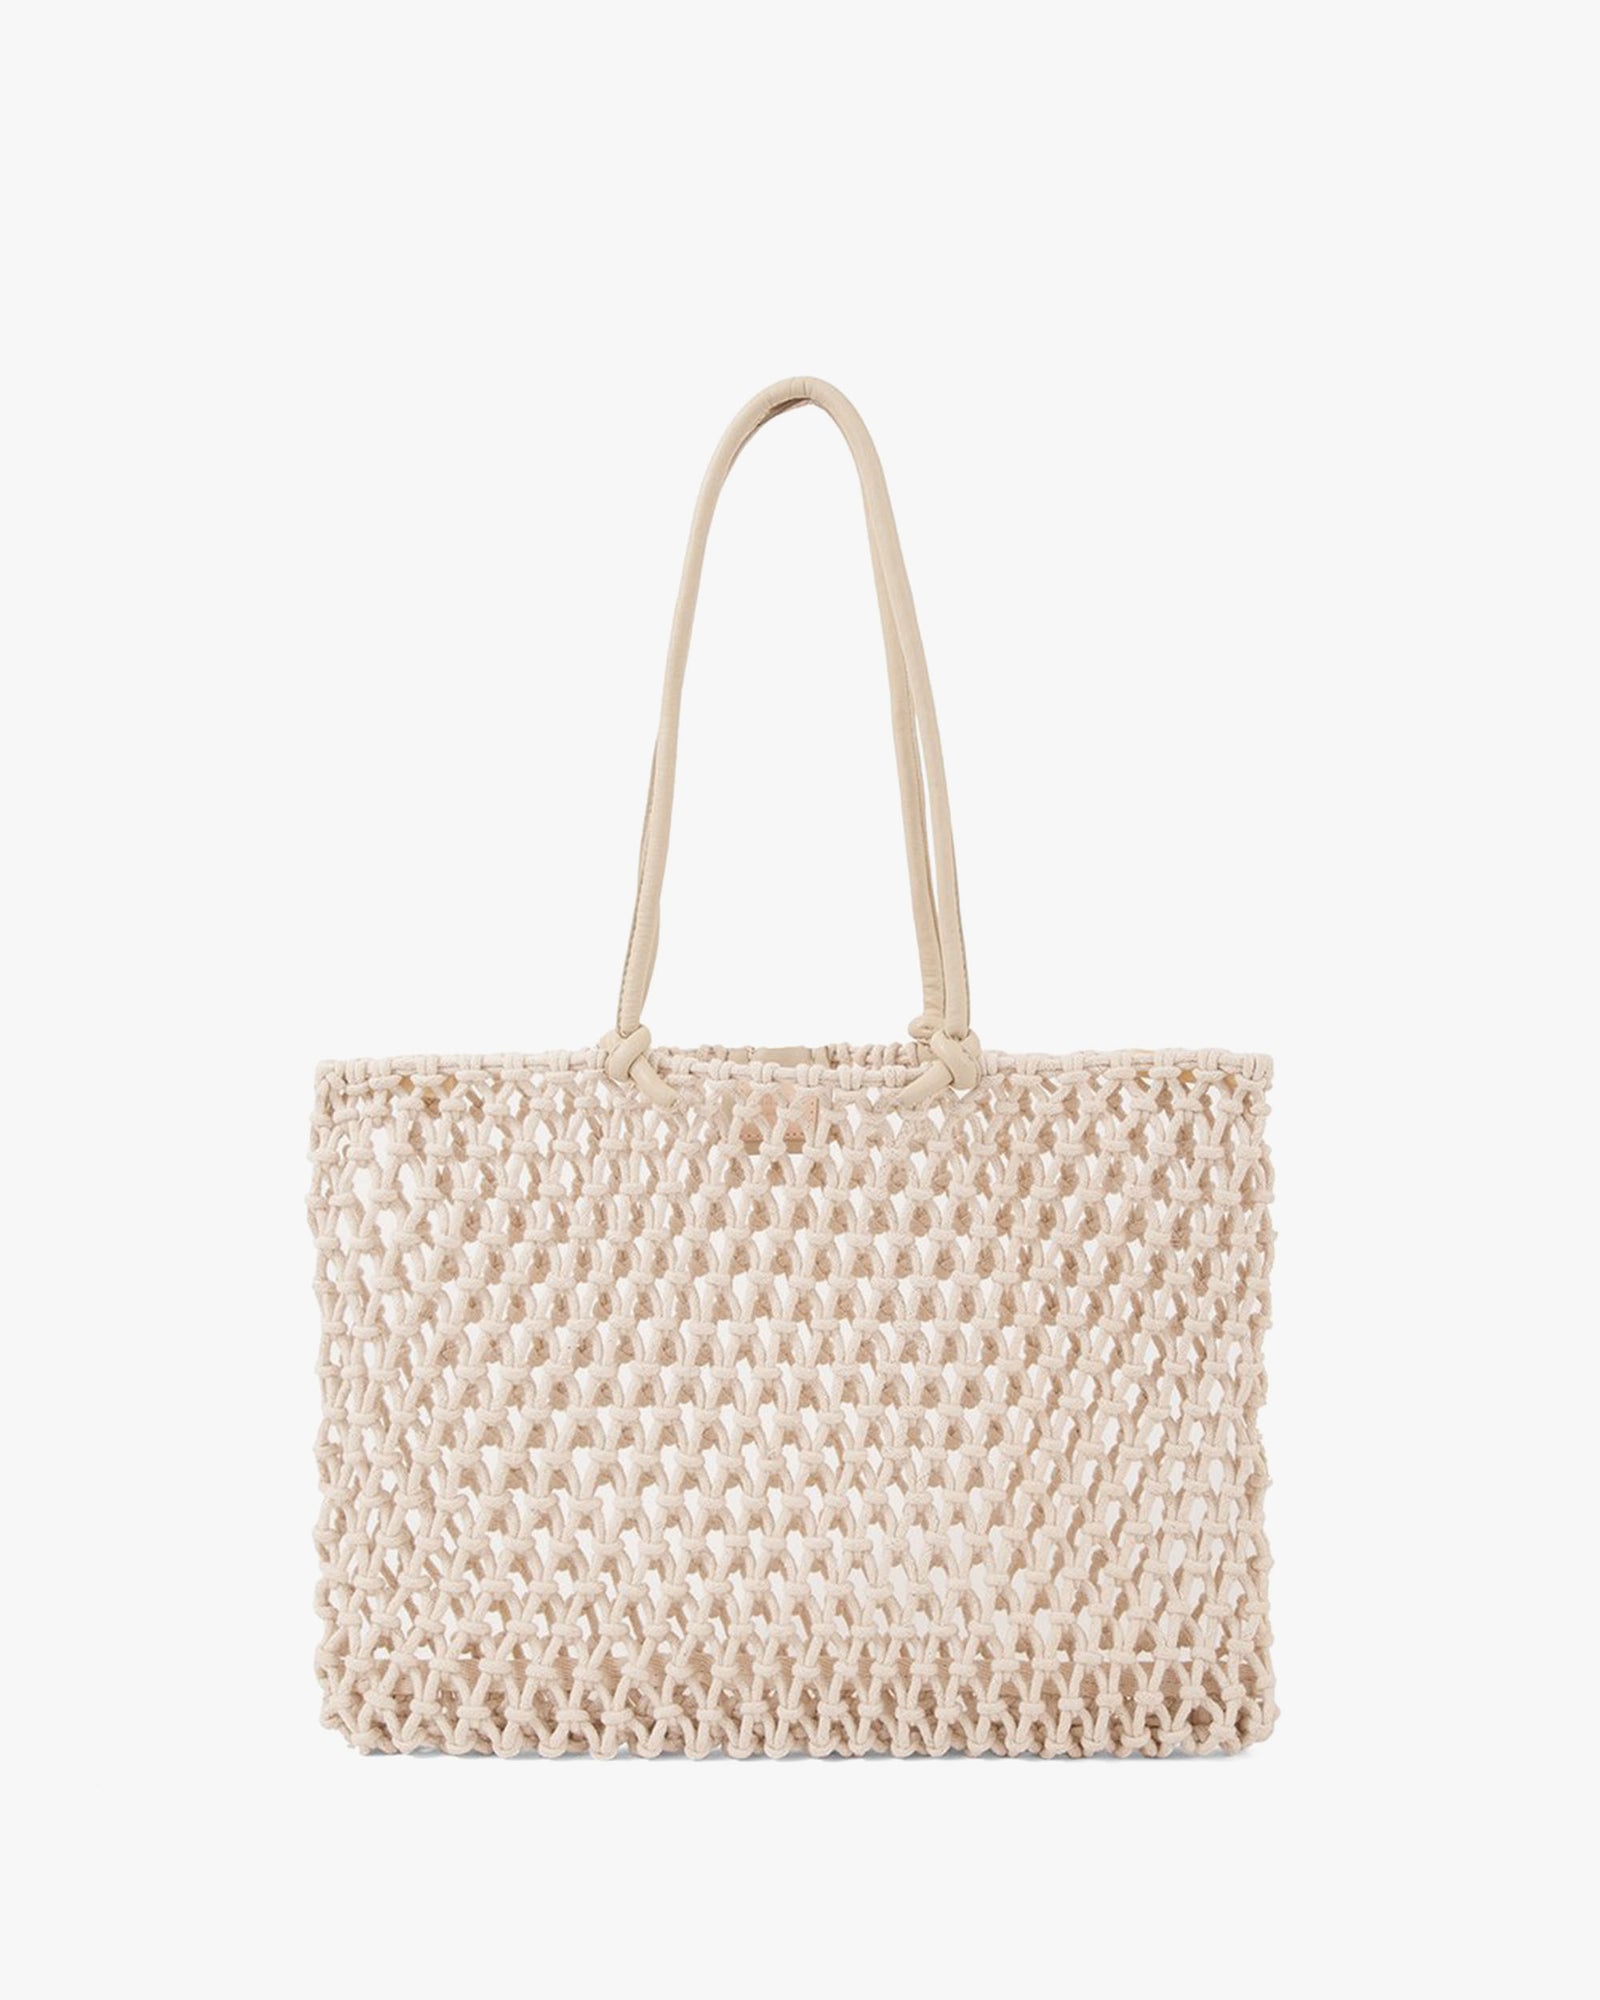 Clare V, Bags, Nwt Clare V Summer Simple Tote Bag Crochet Checkers Clare  Vivier